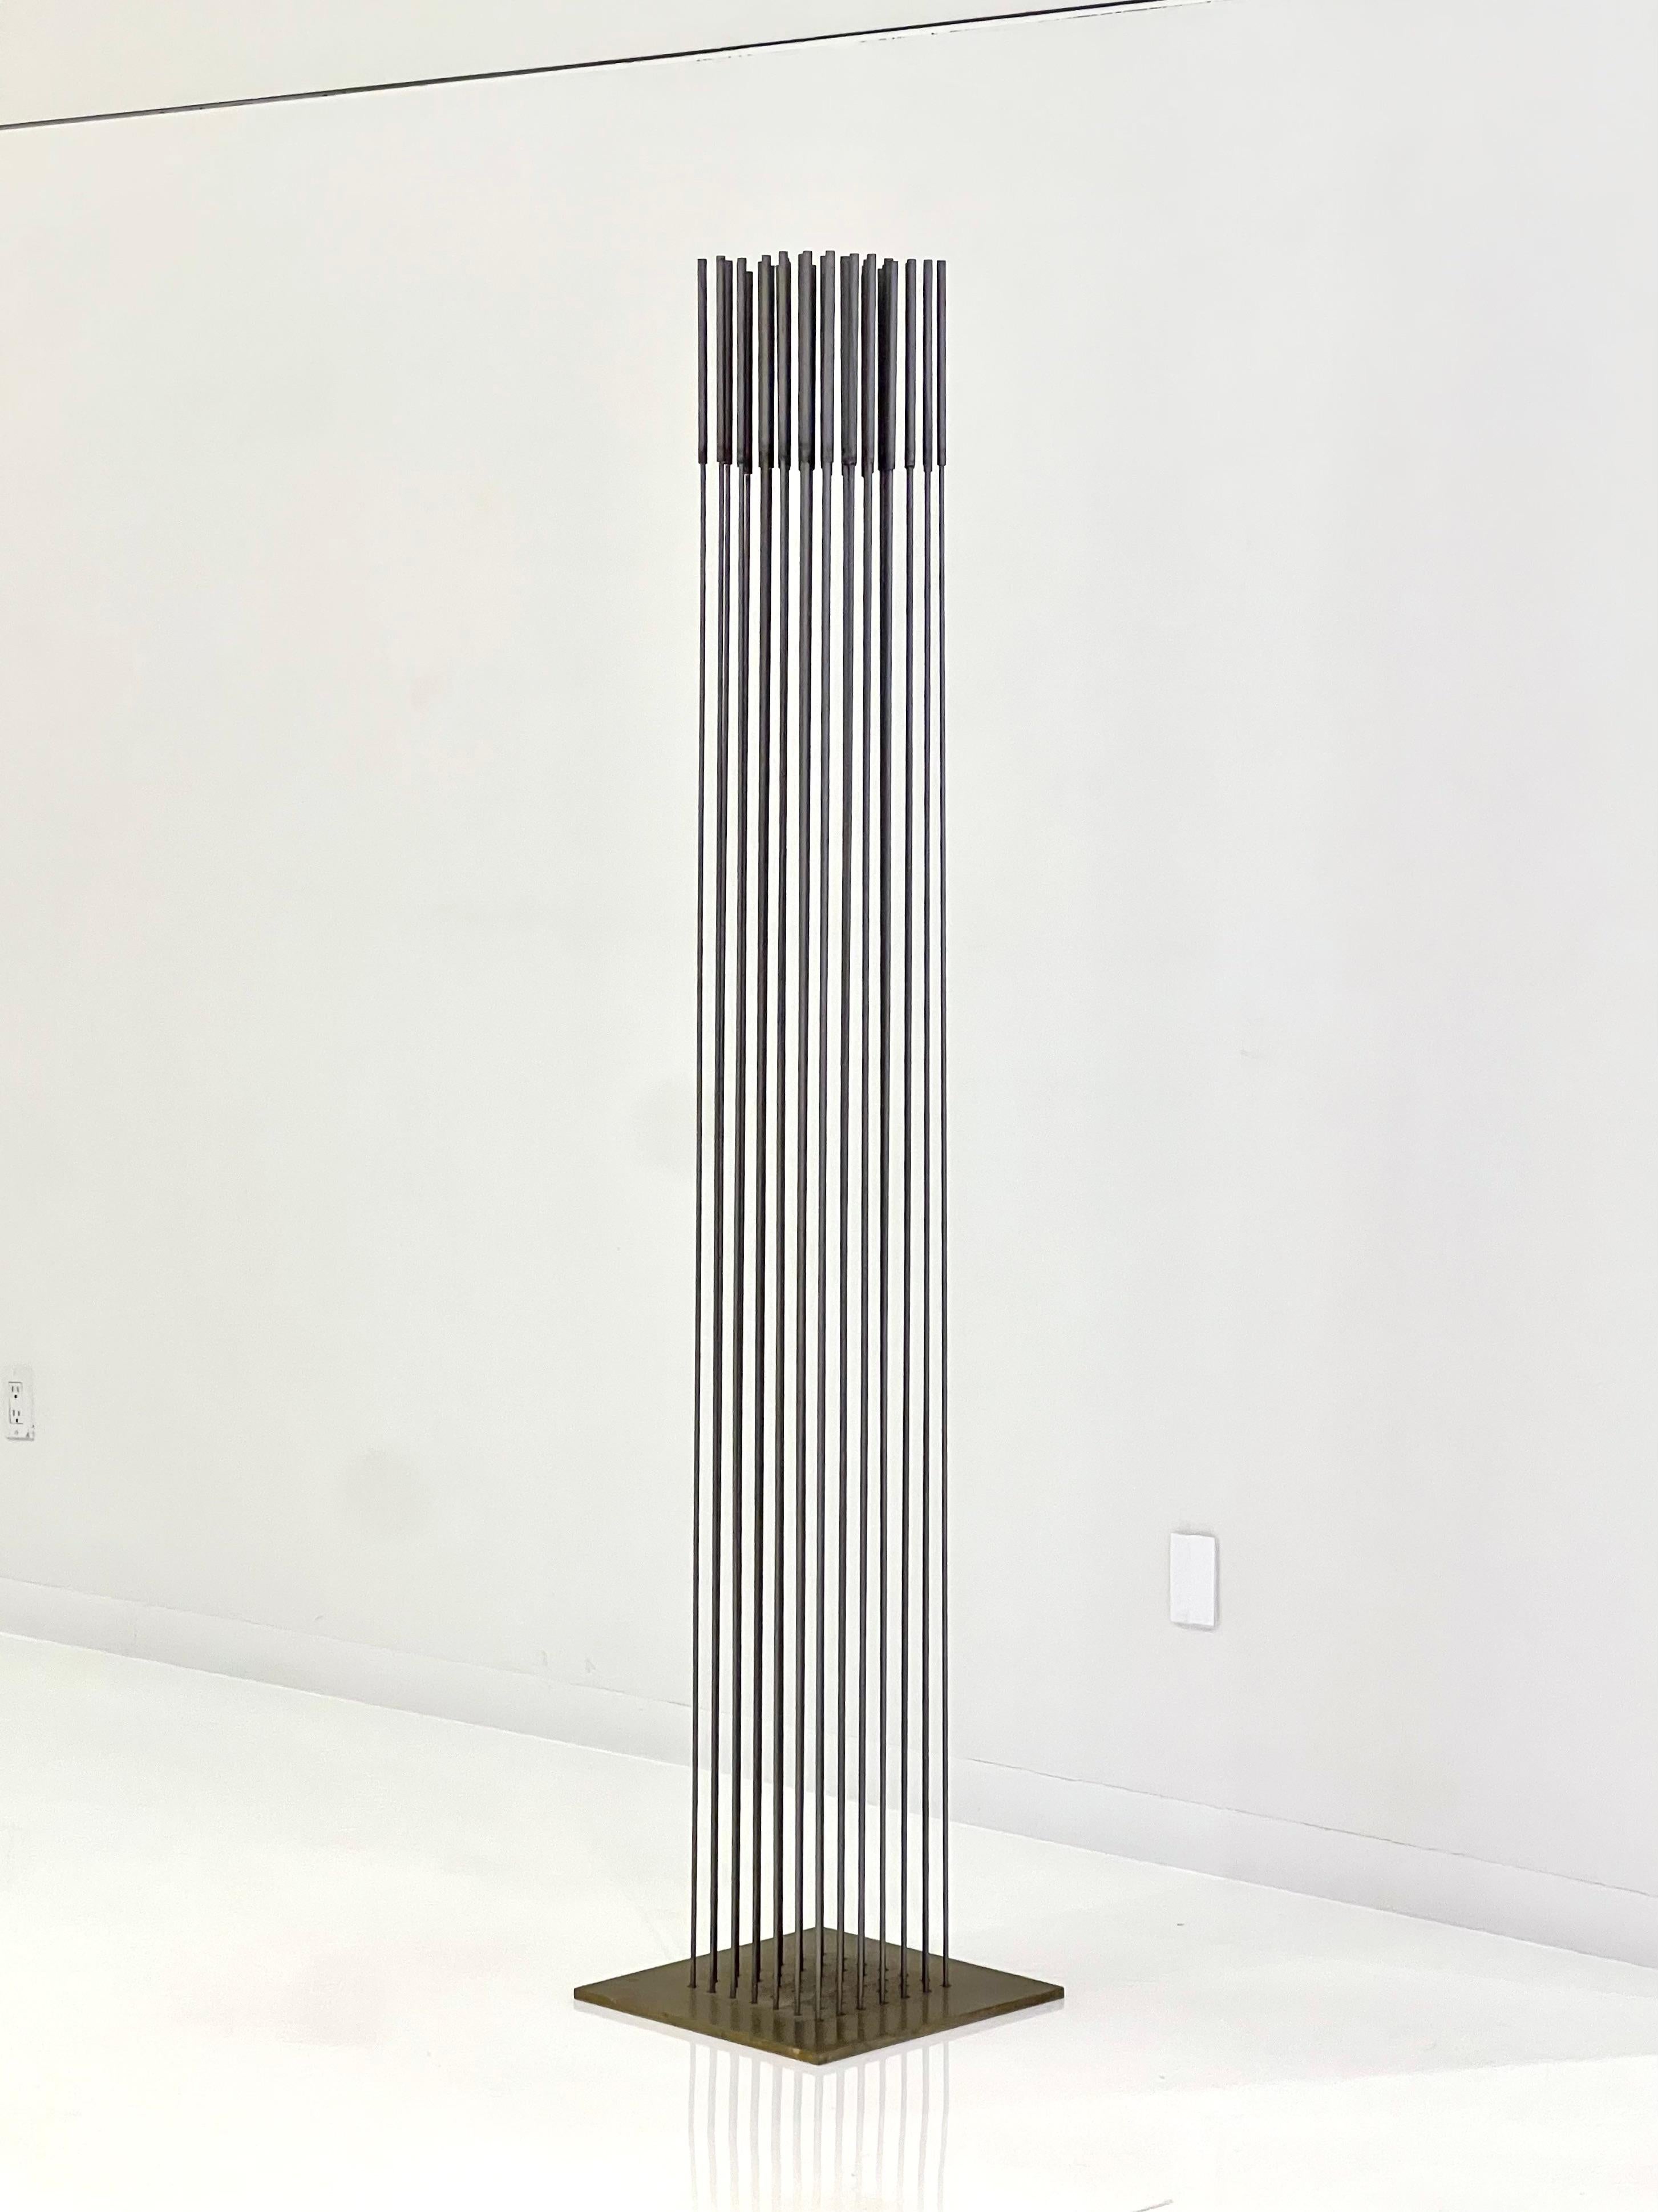 Harry Bertoia, Monumental Sonambient Sculpture, USA, circa 1970's.
Inconel on brass plate, comprised of 49 rods in a 7 x 7 layout with cattails, unmarked. Measures H: 81, W: 16, D: 16 in.

Provenance:
Commissioned directly from Harry Bertoia via